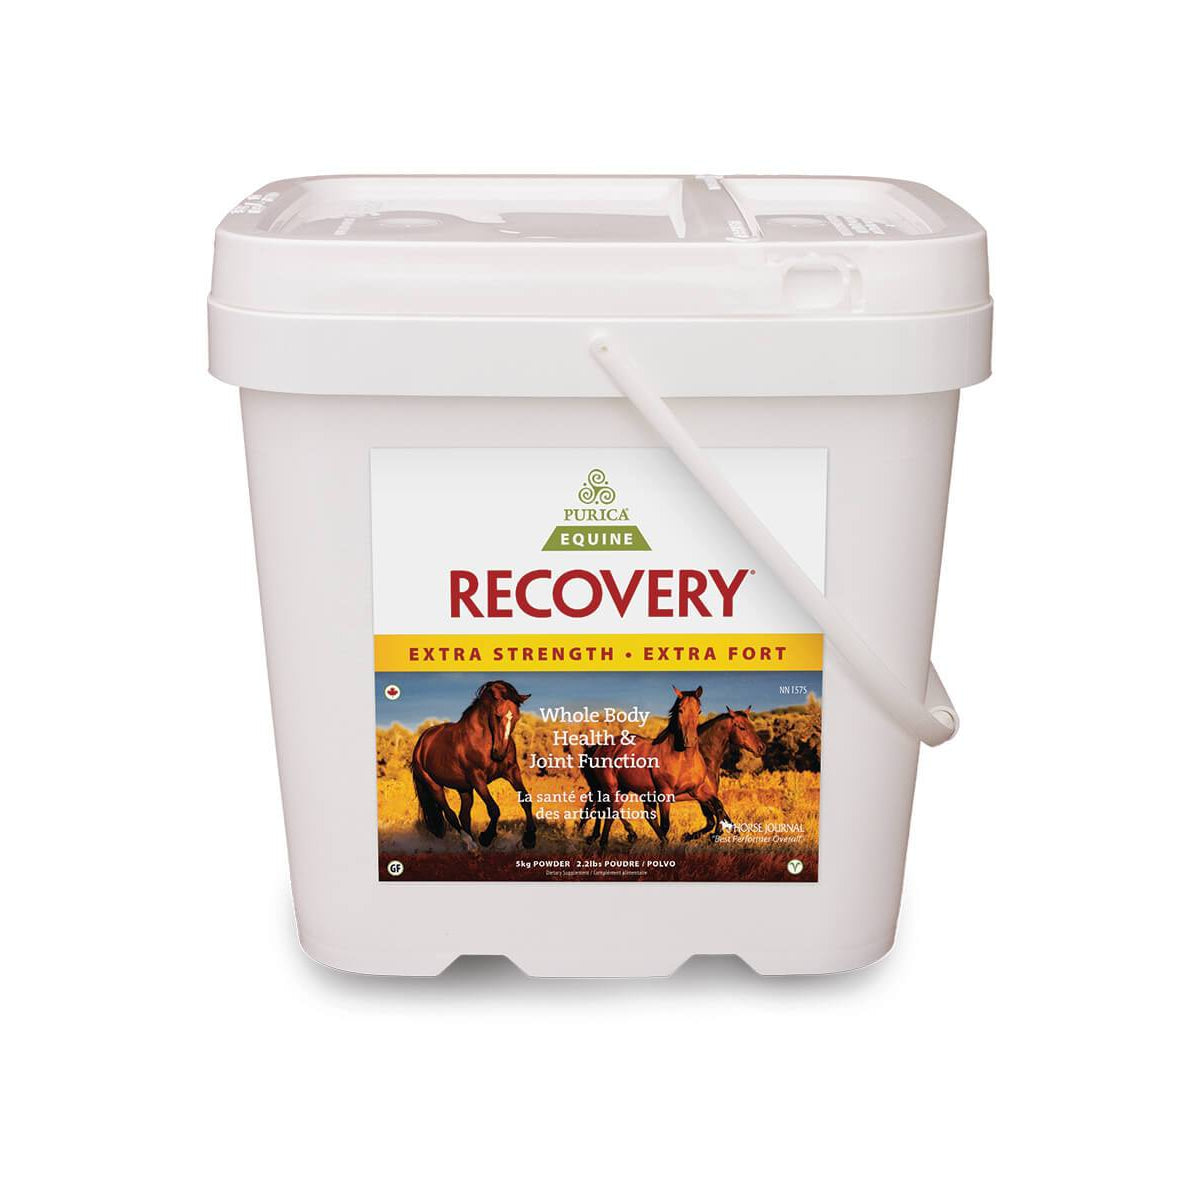 Purica Recovery EQ Extra Strength Beyond Pain Relief 5kg